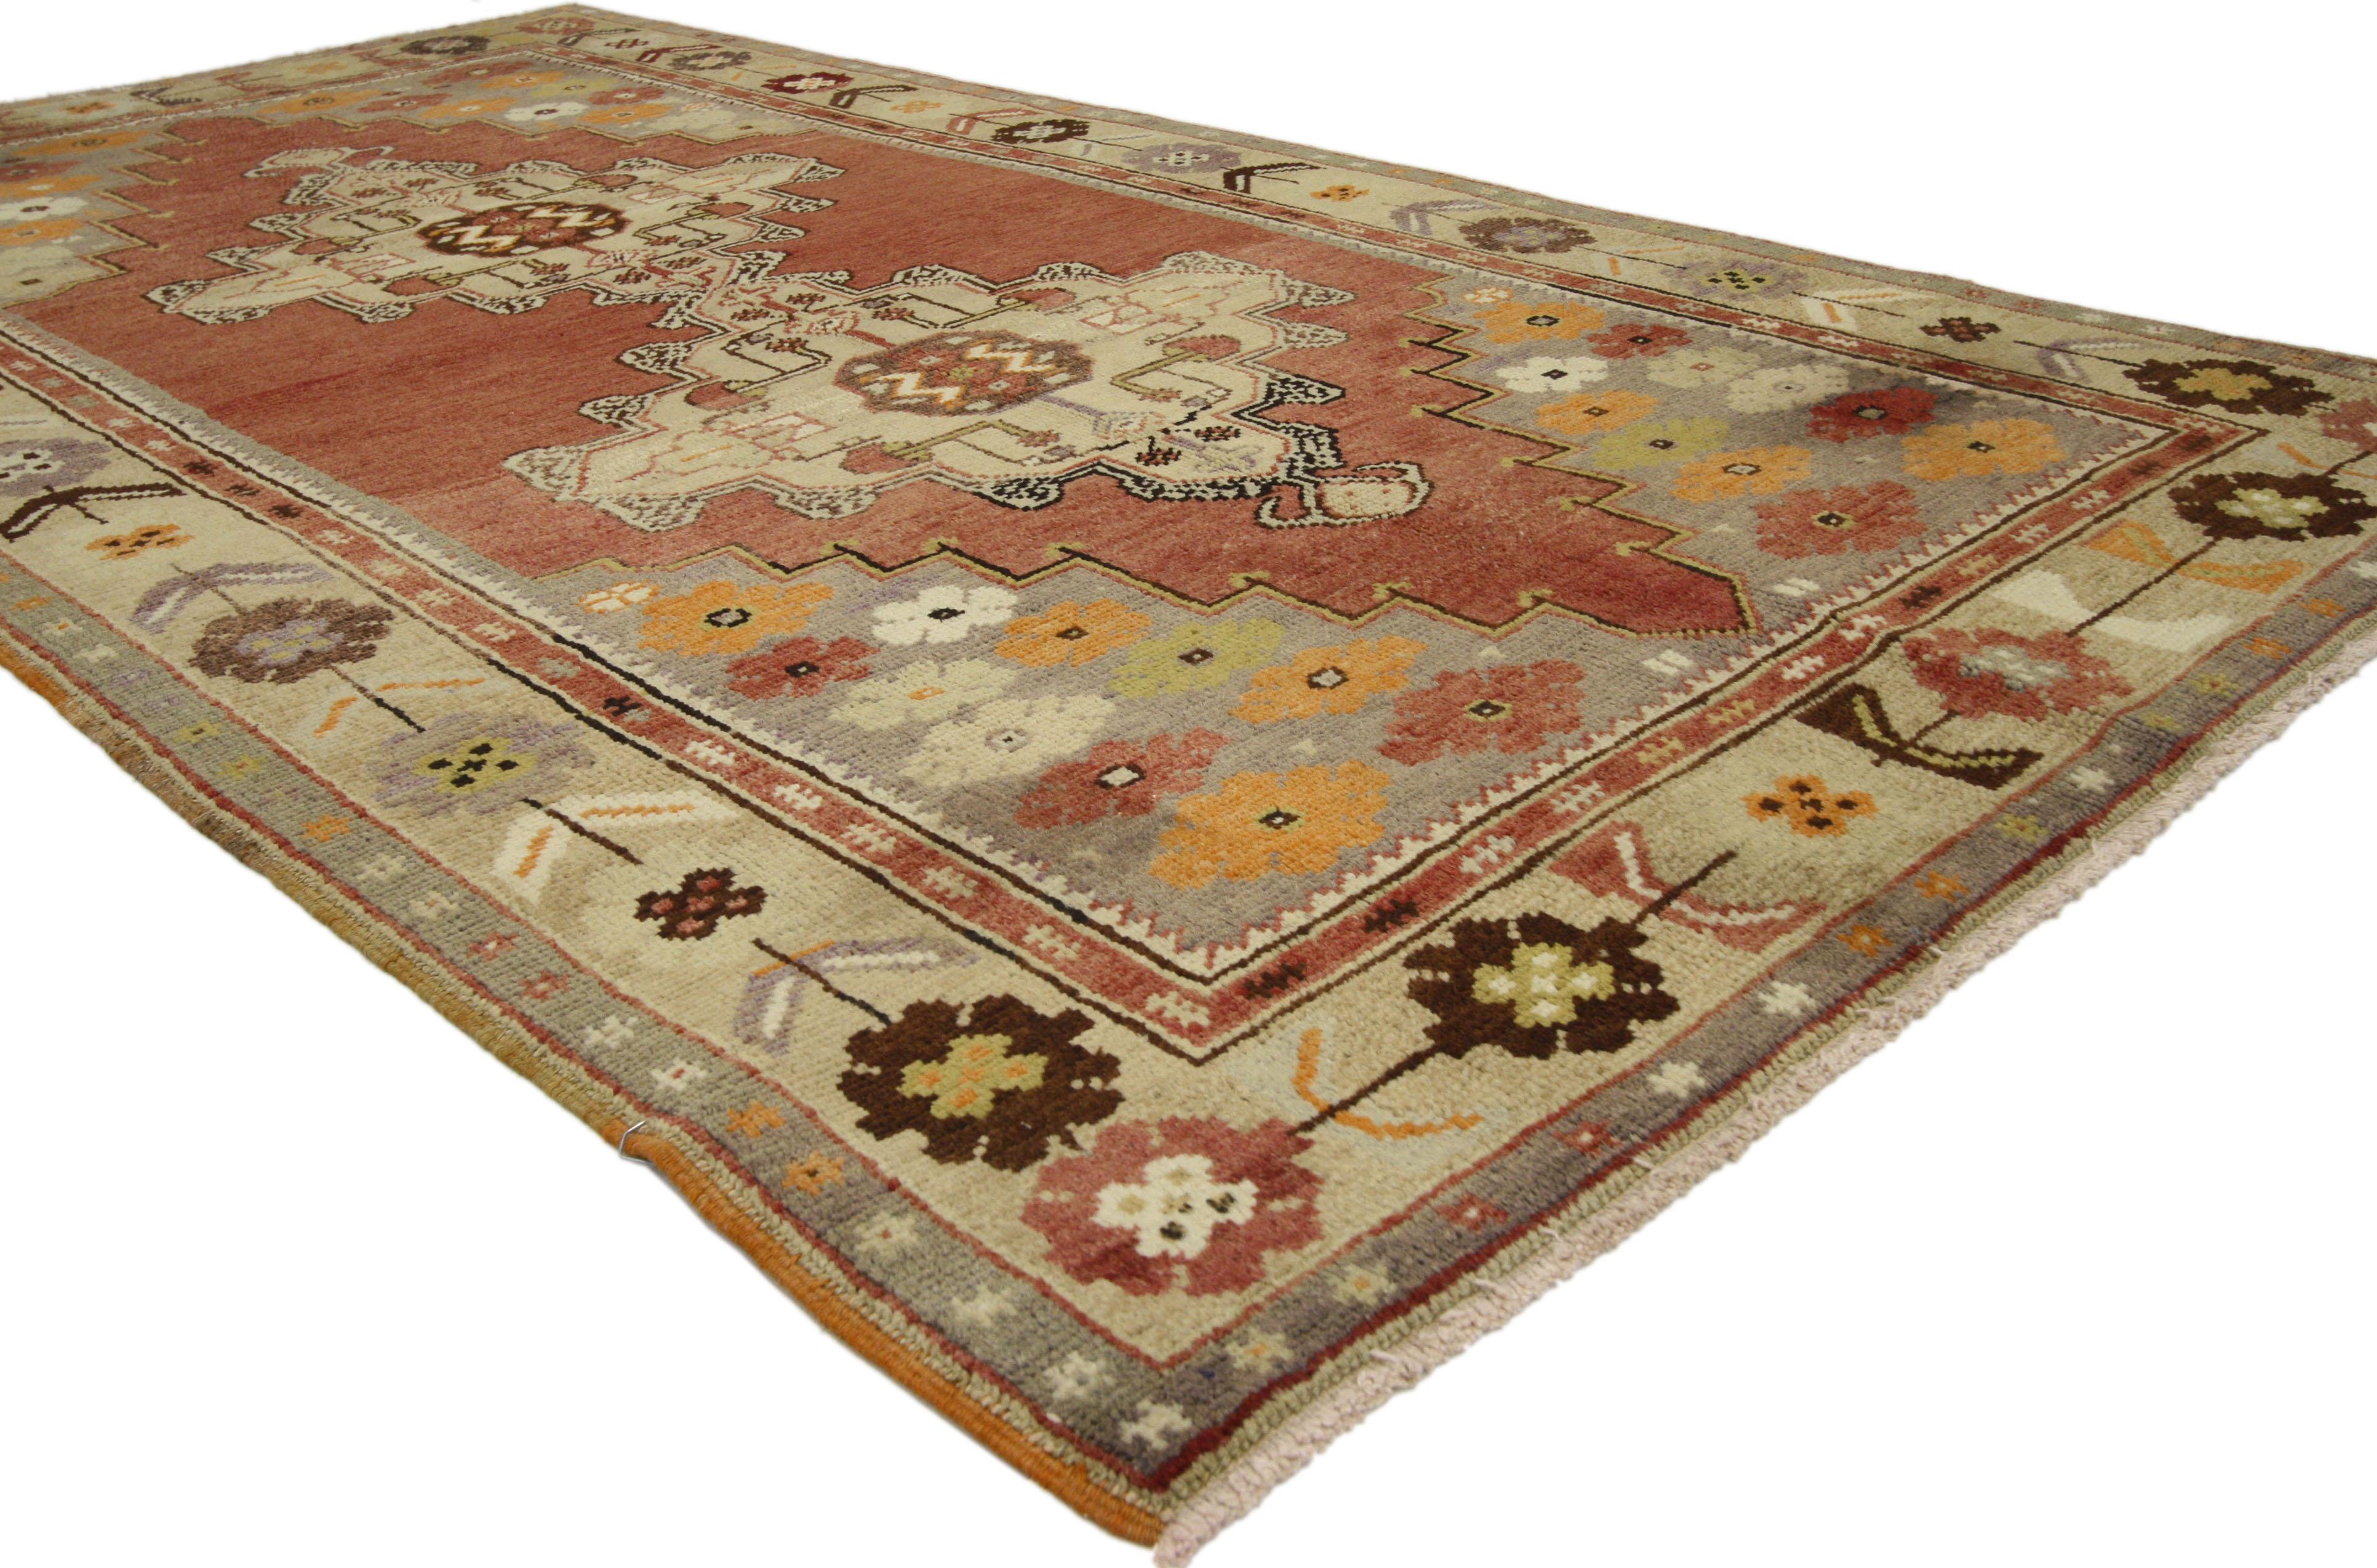 50122, vintage Turkish Oushak rug. This luxurious Oushak rug features two central medallions in geometric styles with plump fruits and delicate flowers topped with cruciform figures on a field of red. Slate spandrels sprout with delicate blooming